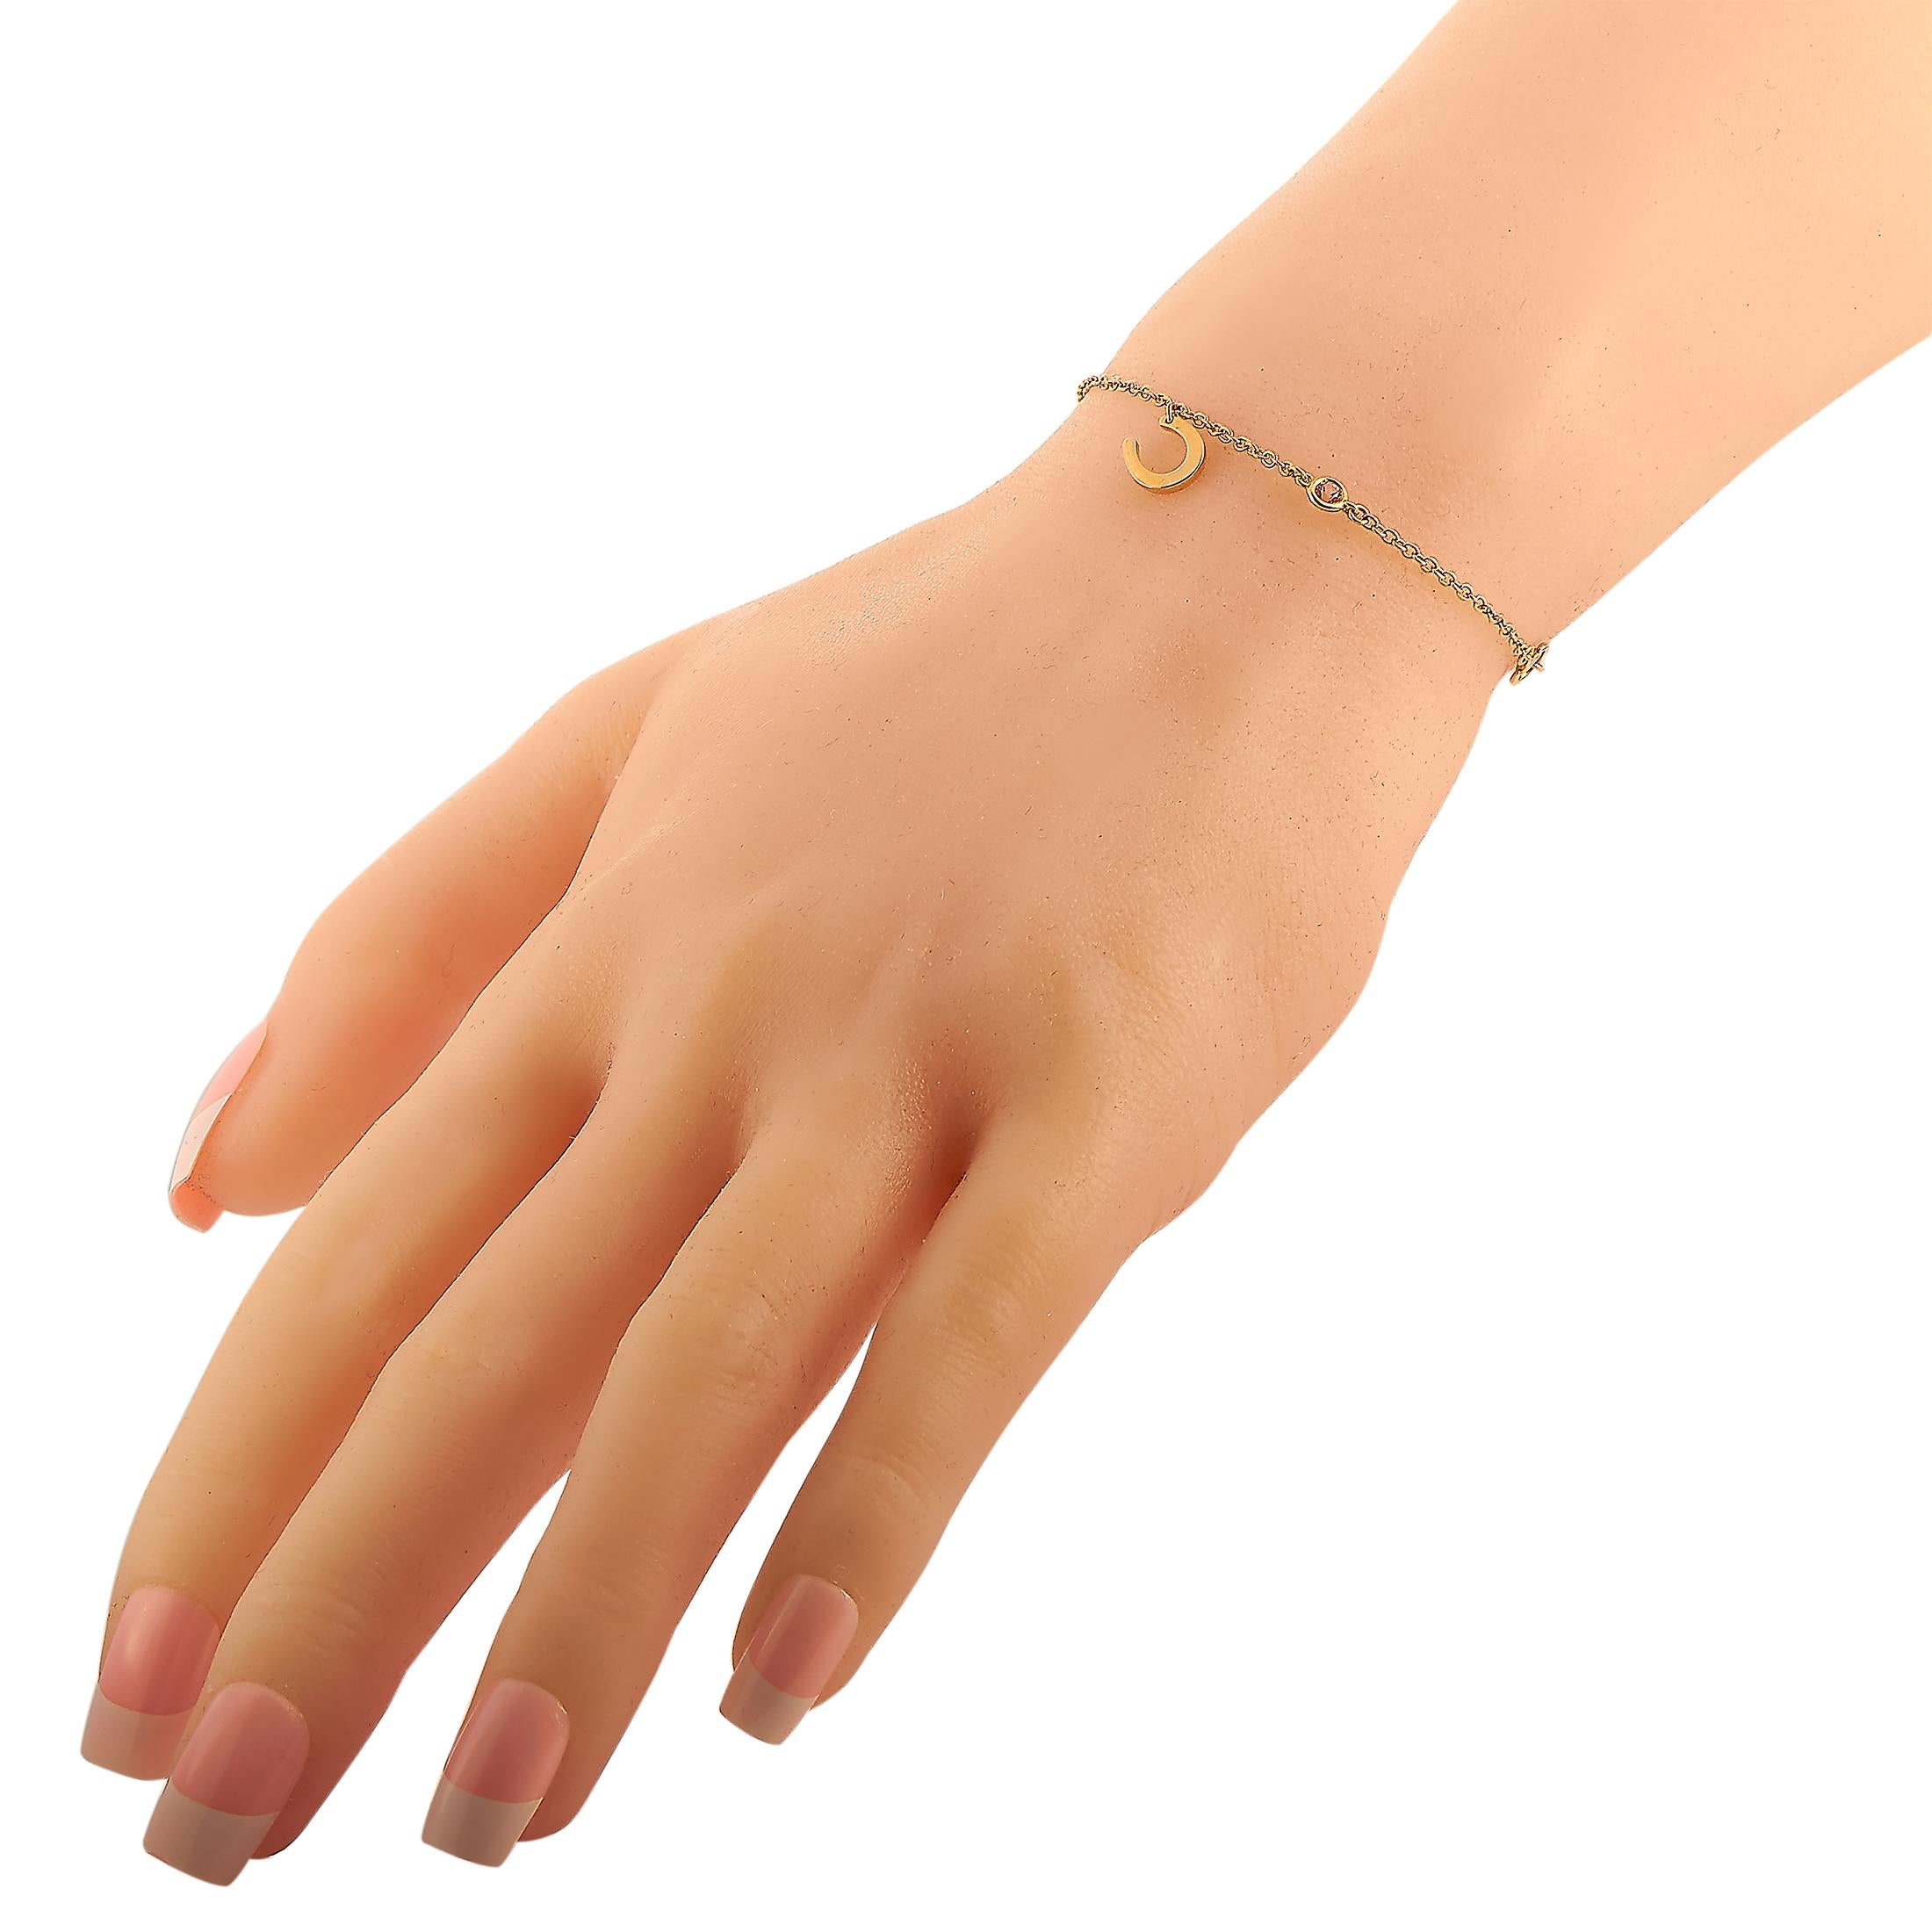 This Ubaldi bracelet is crafted from 18K rose gold and weighs 2.3 grams, measuring 6” in length.

The bracelet is offered in brand new condition and includes a gift box.